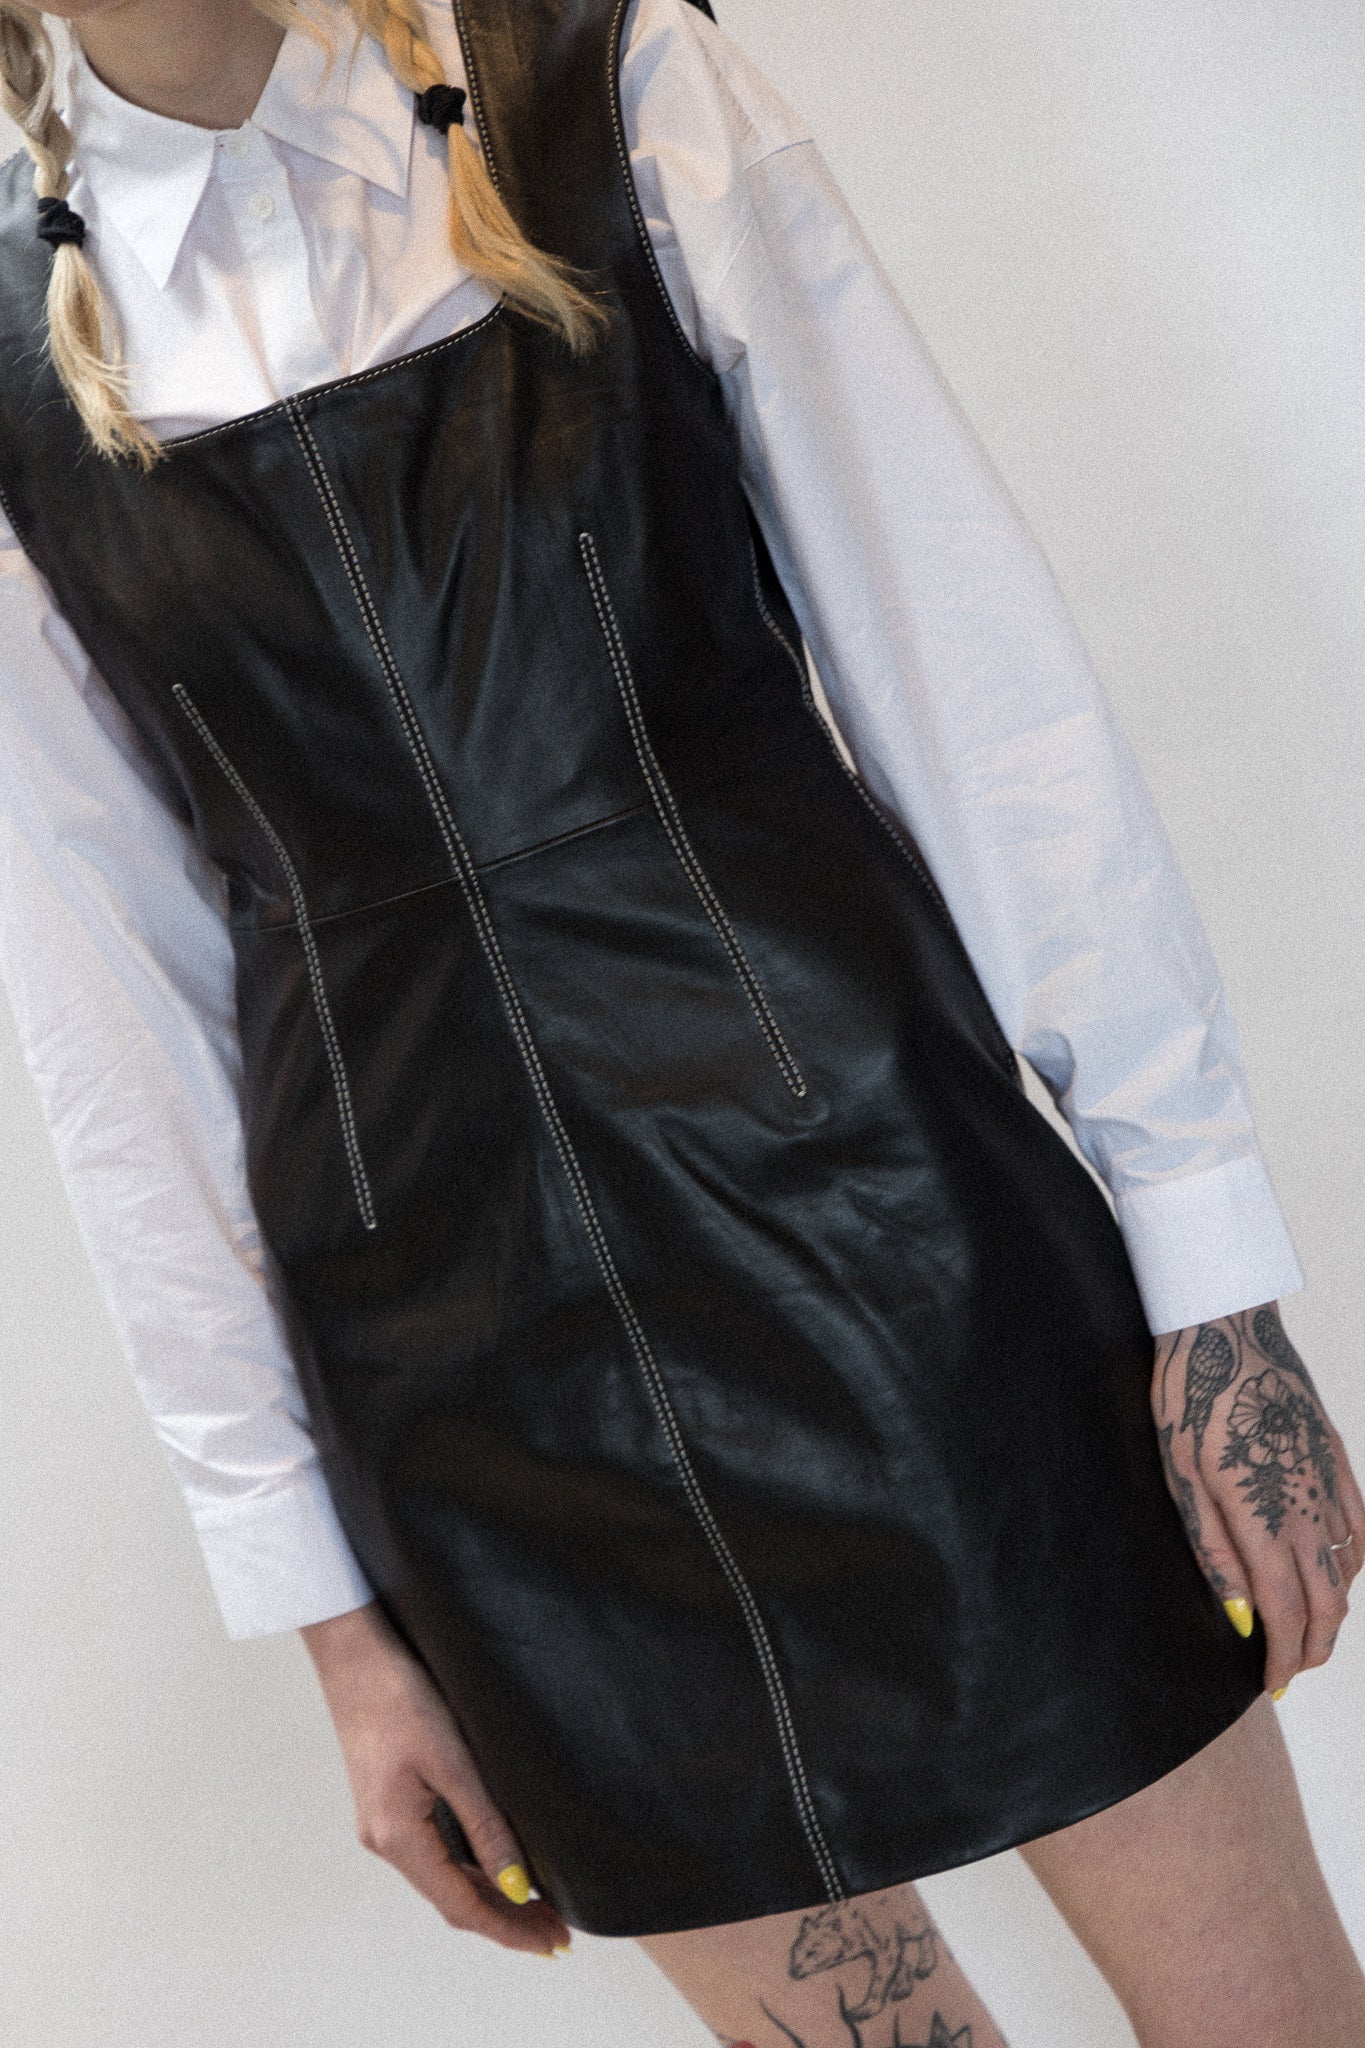 OSRains leather dress